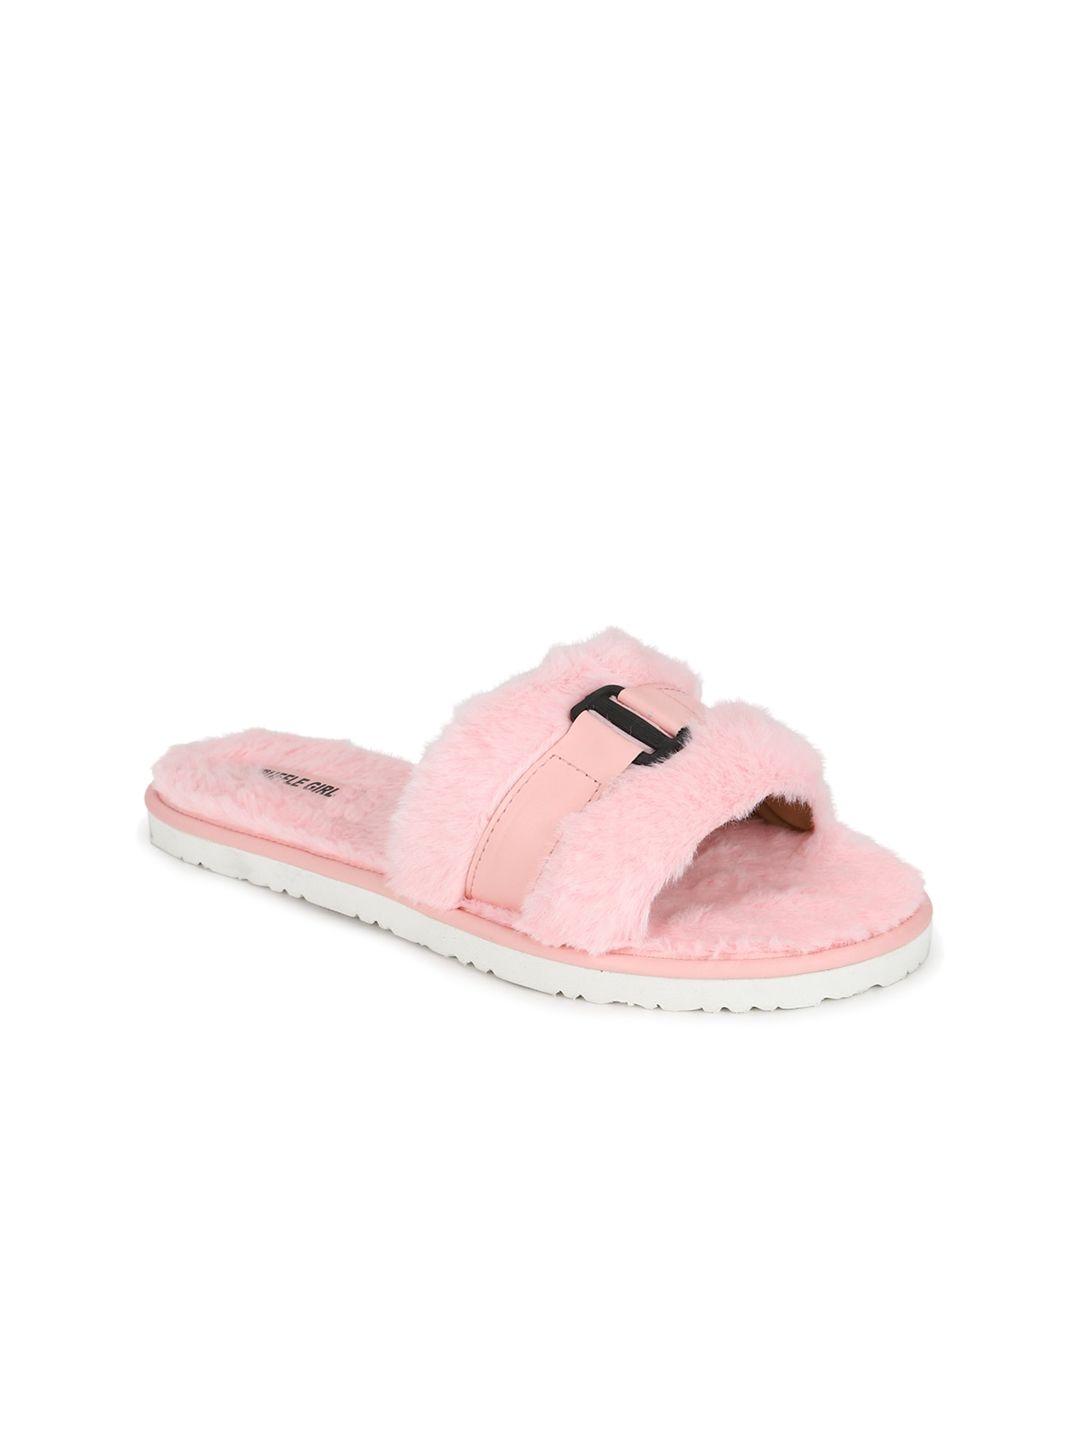 truffle collection women pink colourblocked open toe flats with buckles